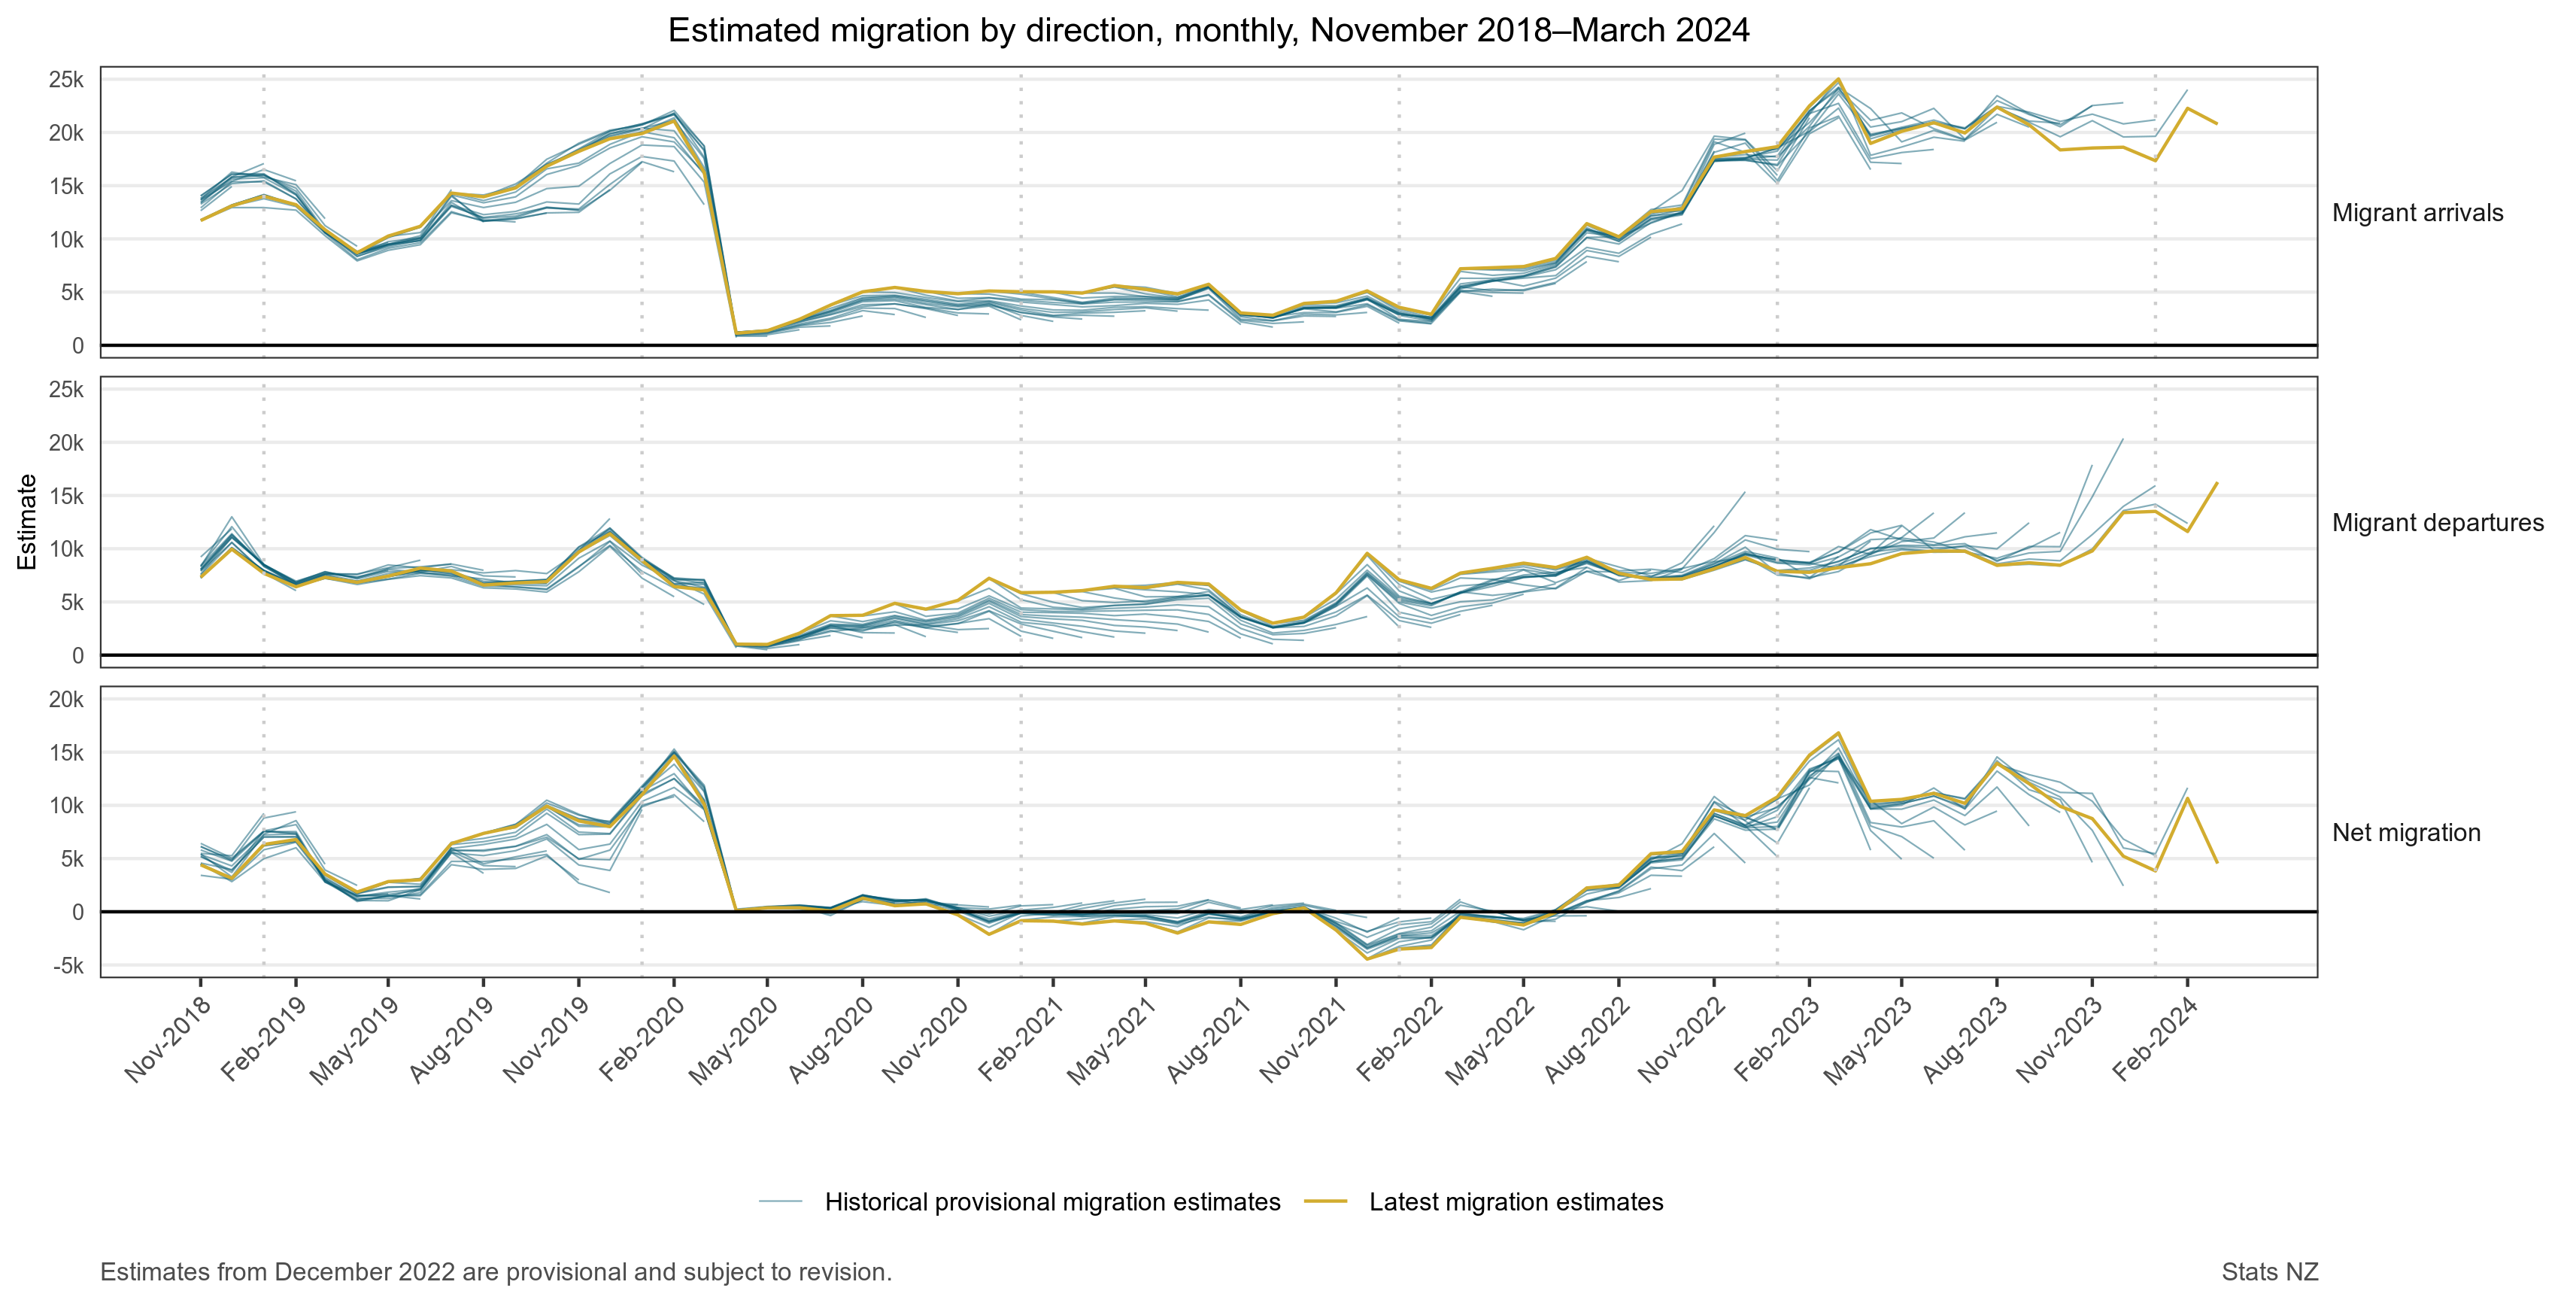 Three graphs showing estimated migration by direction, monthly, November 2018-March 2024